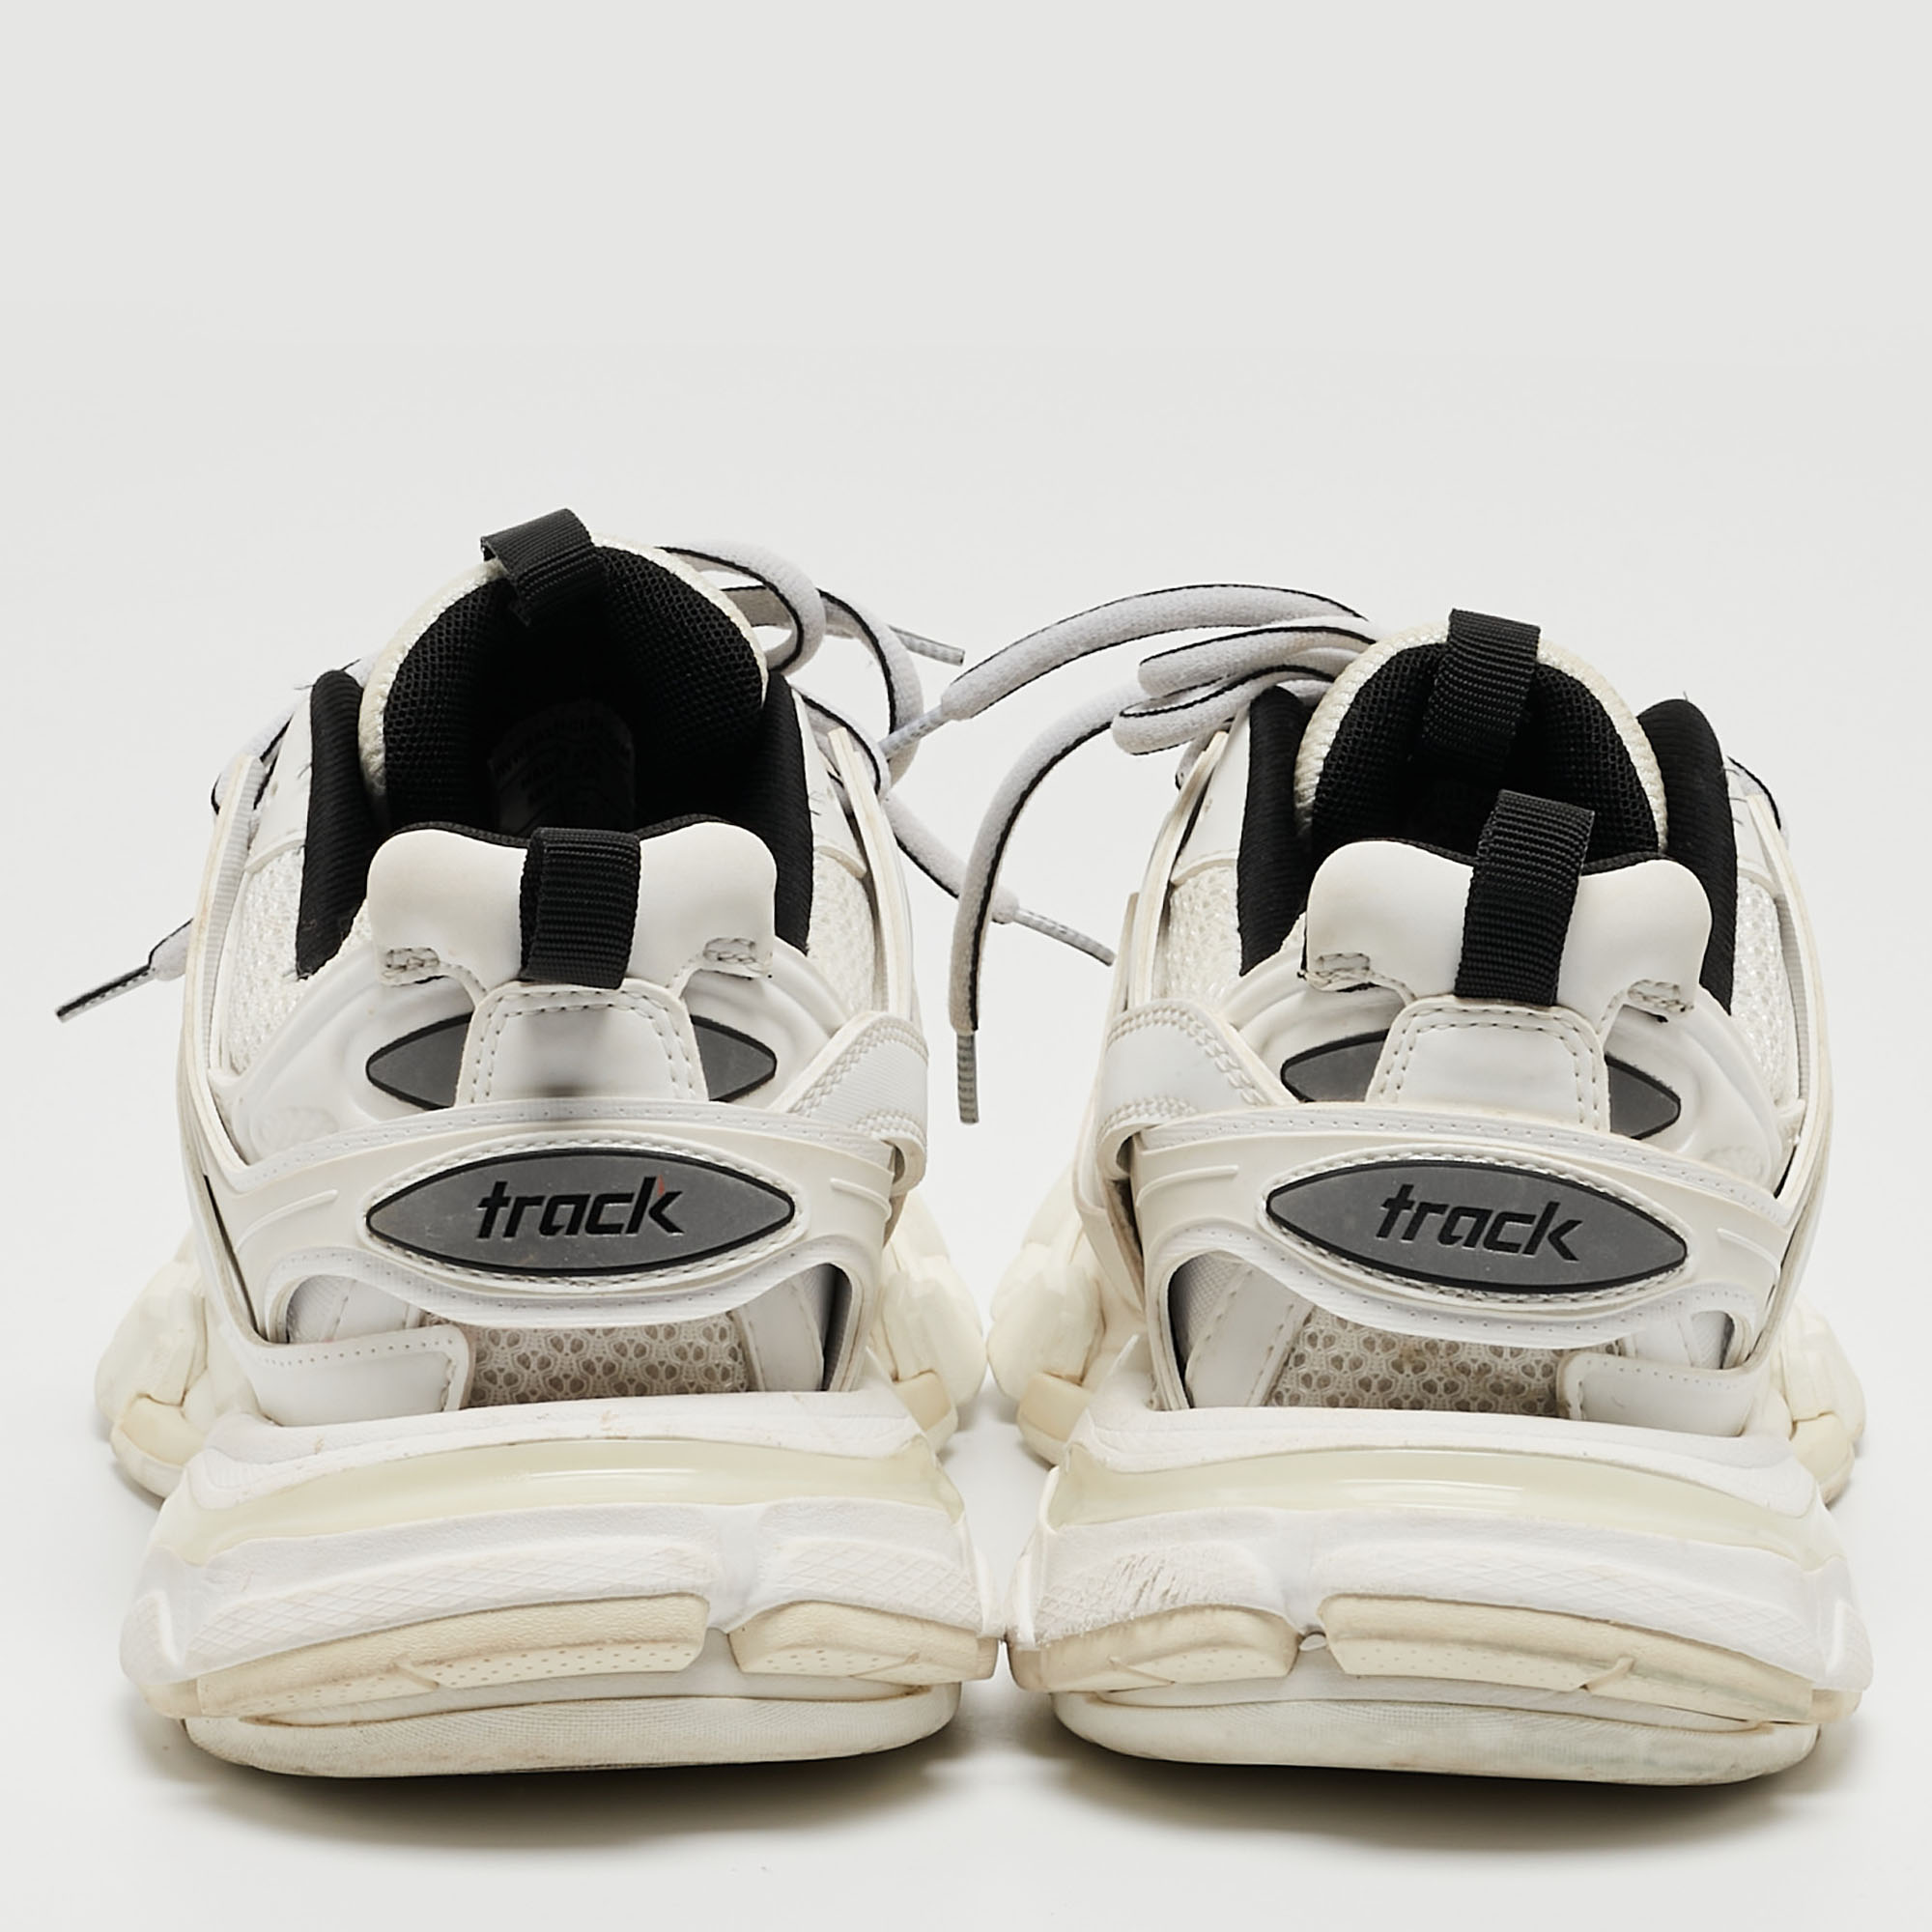 Balenciaga White Leather And Mesh Track Sneakers Size 37